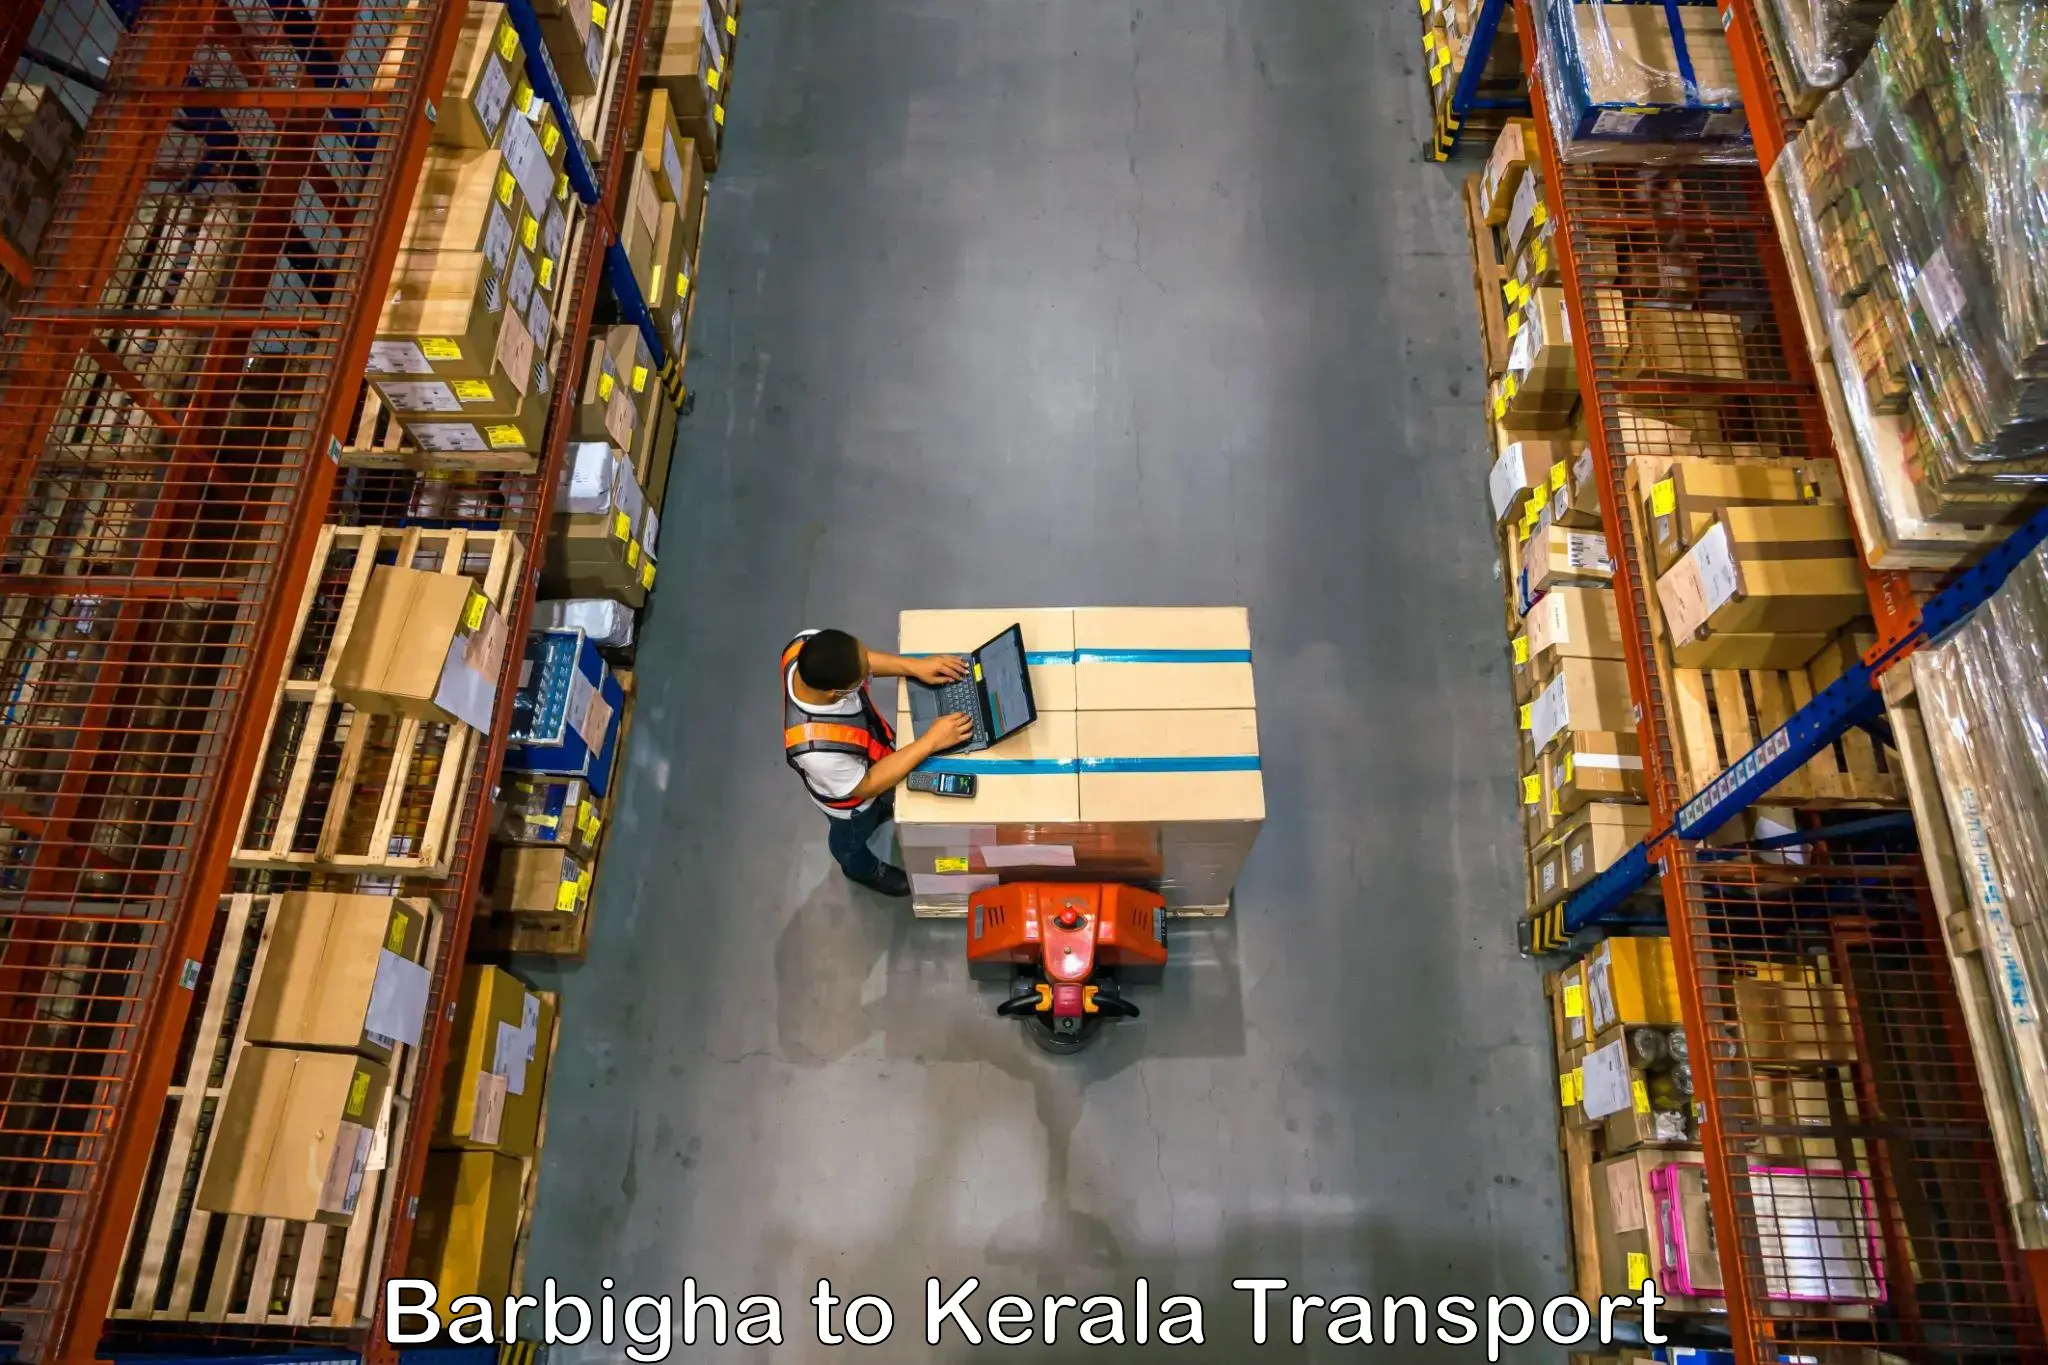 Truck transport companies in India Barbigha to Cochin University of Science and Technology